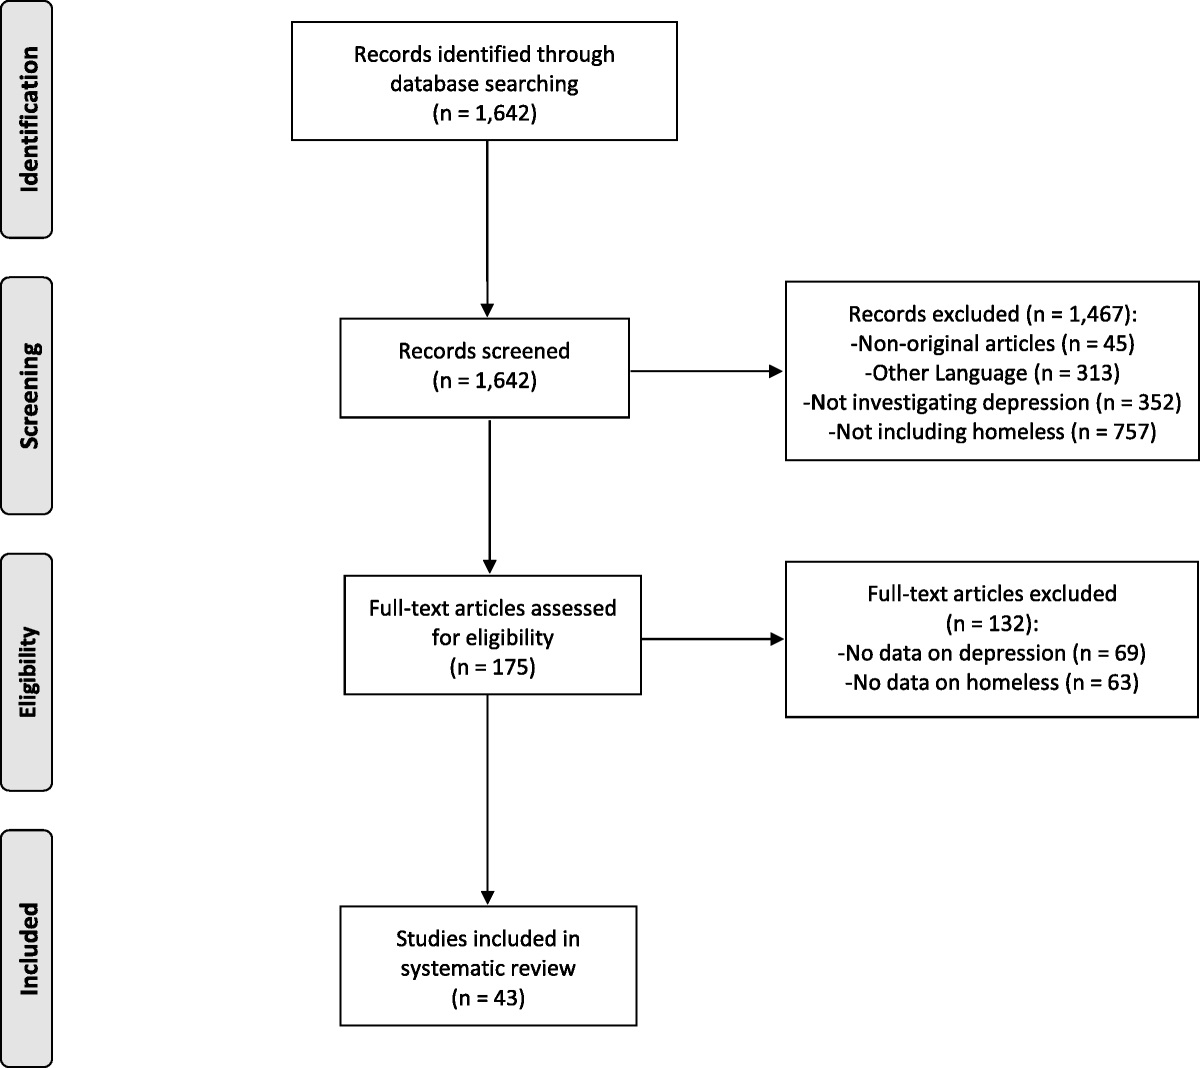 Homelessness and Depressive Symptoms: A Systematic Review